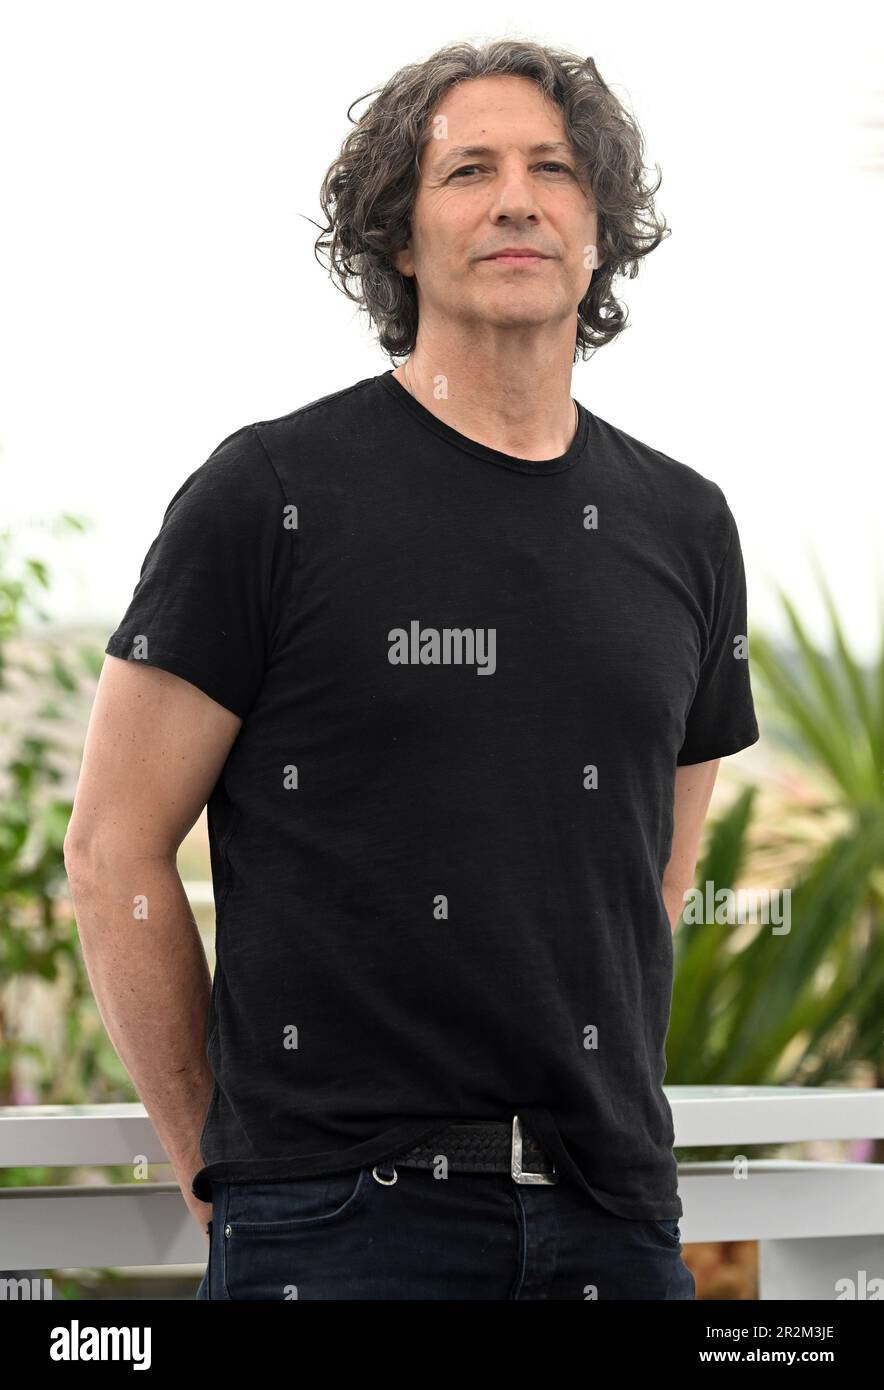 Cannes, France. 20th May, 2023. British director Jonathan Glazer attends a photo call for The Zone Of Interest at the 76th Cannes Film Festival at Palais des Festivals in Cannes, France on Saturday, May 20, 2023. Photo by Rune Hellestad/ Credit: UPI/Alamy Live News Stock Photo